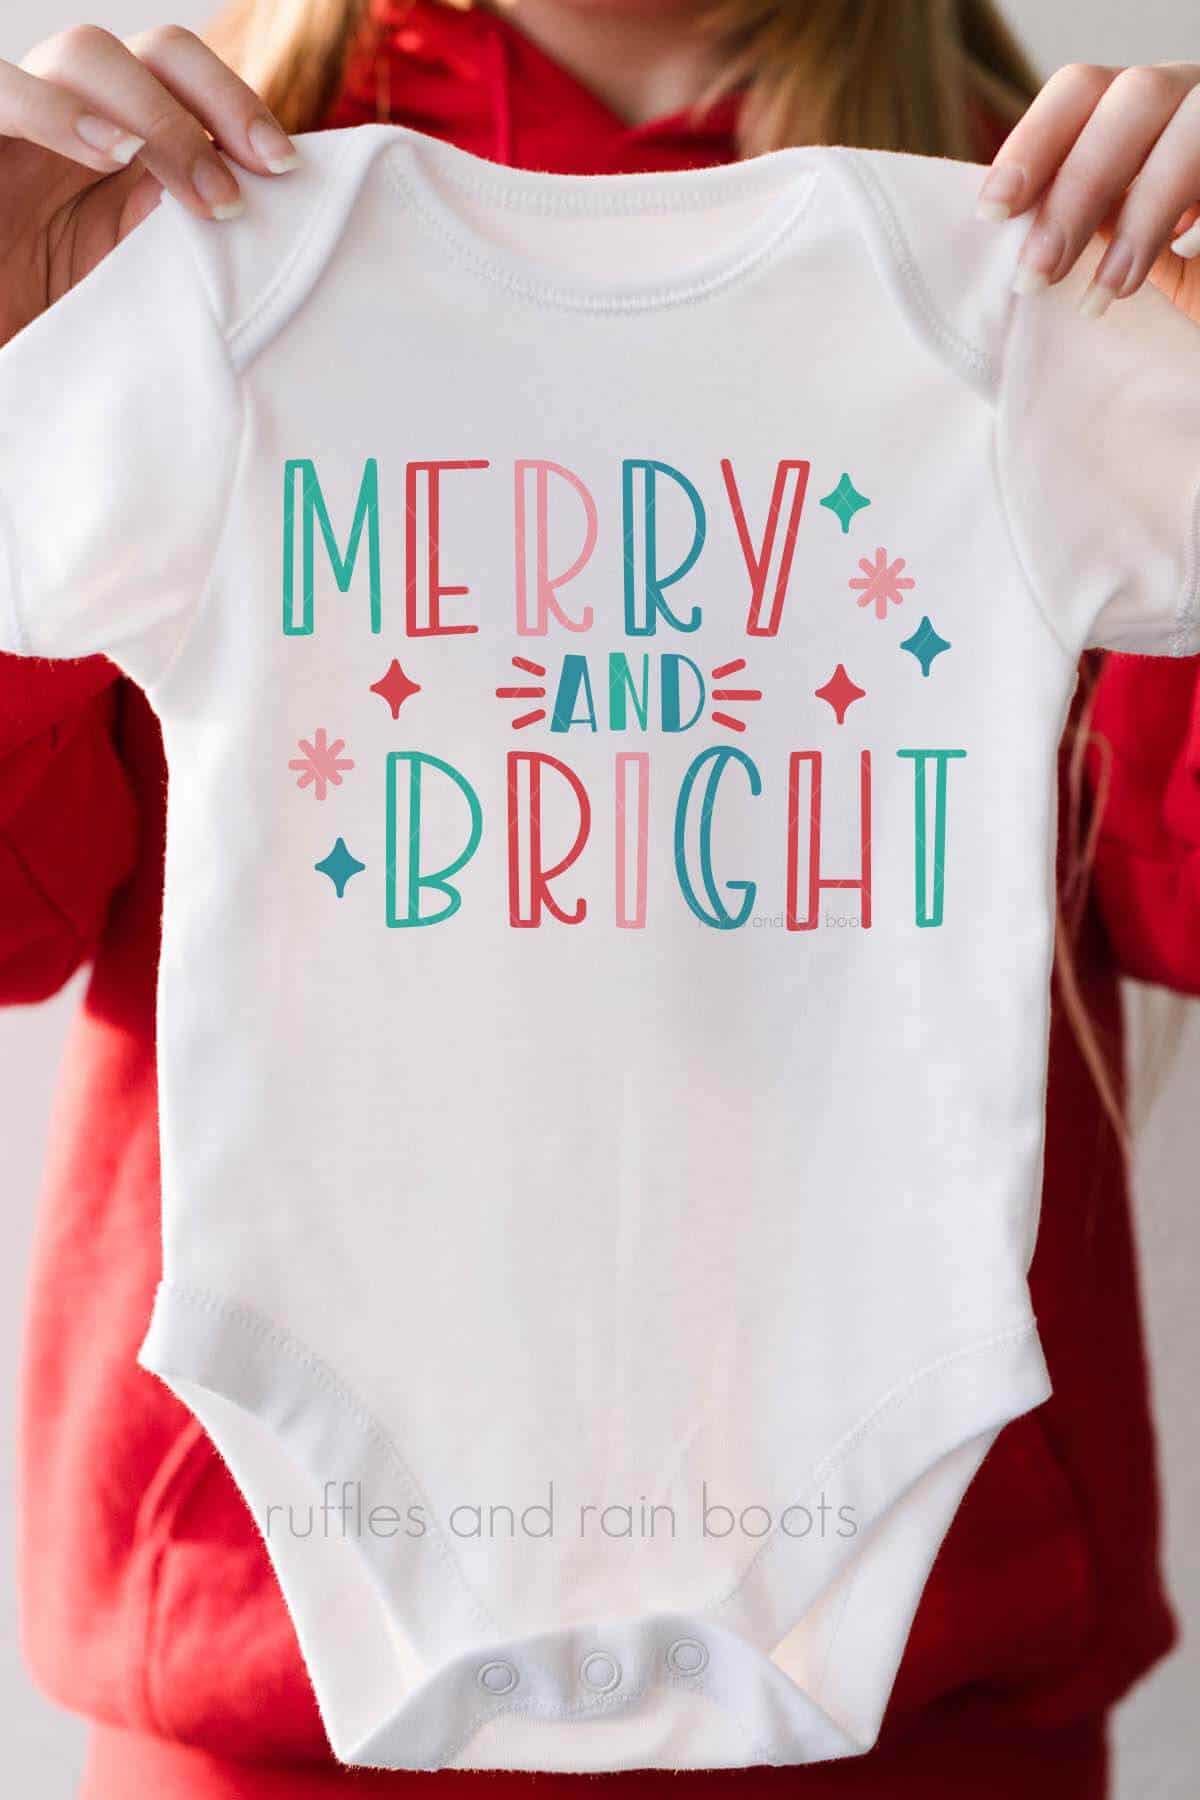 Vertical image of woman in red holding a white baby body suit which reads merry and bright in modern coloring.